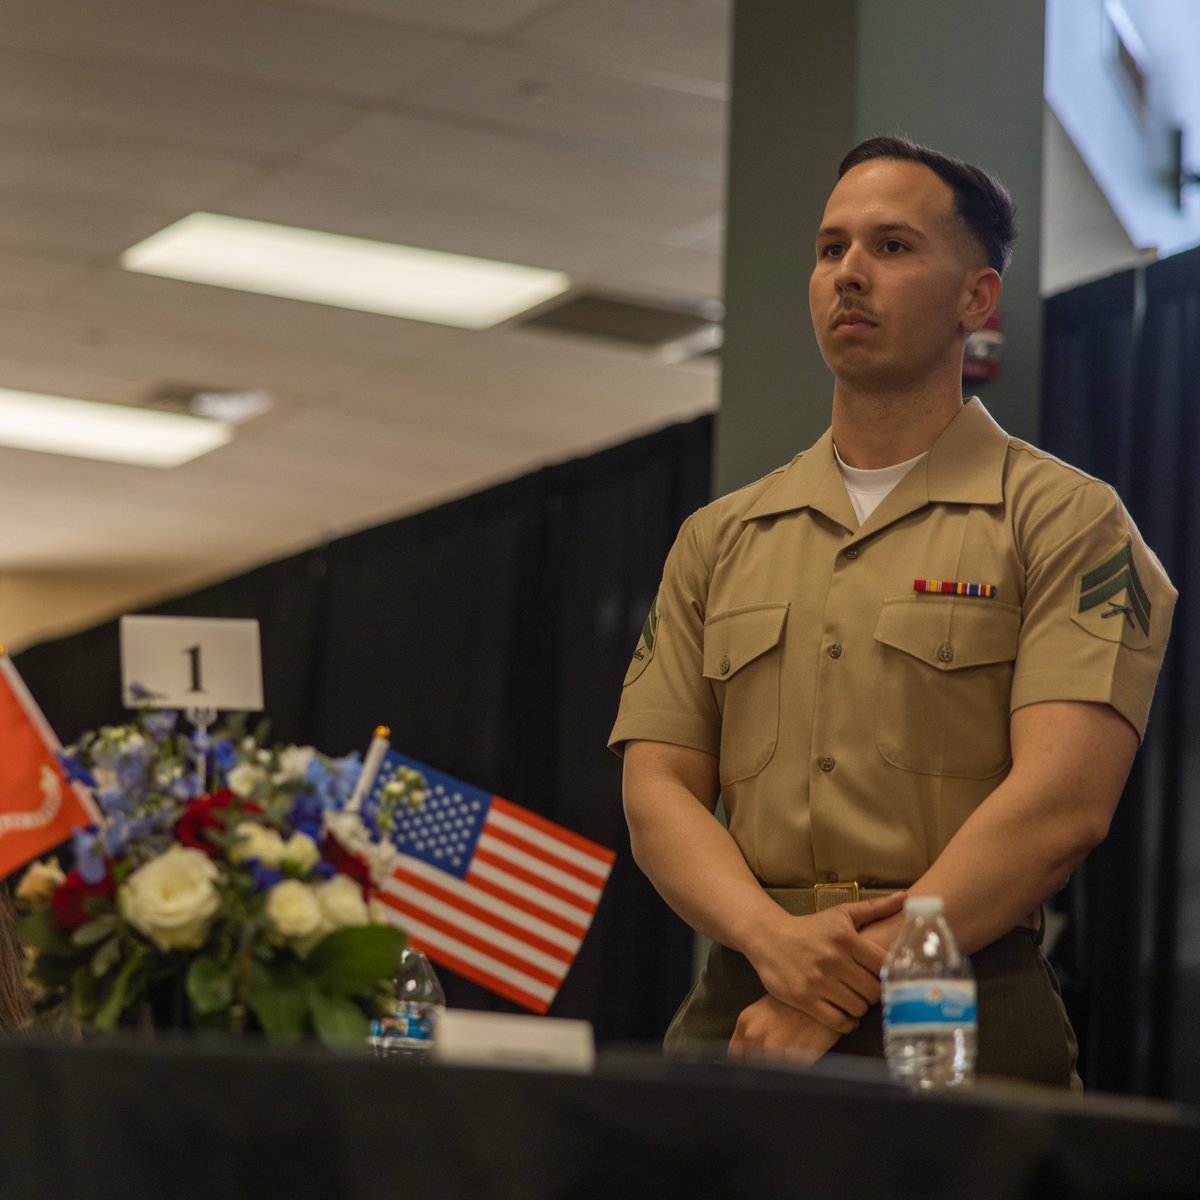 Above and Beyond U.S. Marine Corps Cpl Jarrell Bostick and Cpl Ronald GonzalezTrinta have been recognized as Service Members of the Quarter, during the Armed Services YMCA Service Members of the Quarter Honoree Luncheon held at Copper Mountain College’s Bell Center. | @USMC |